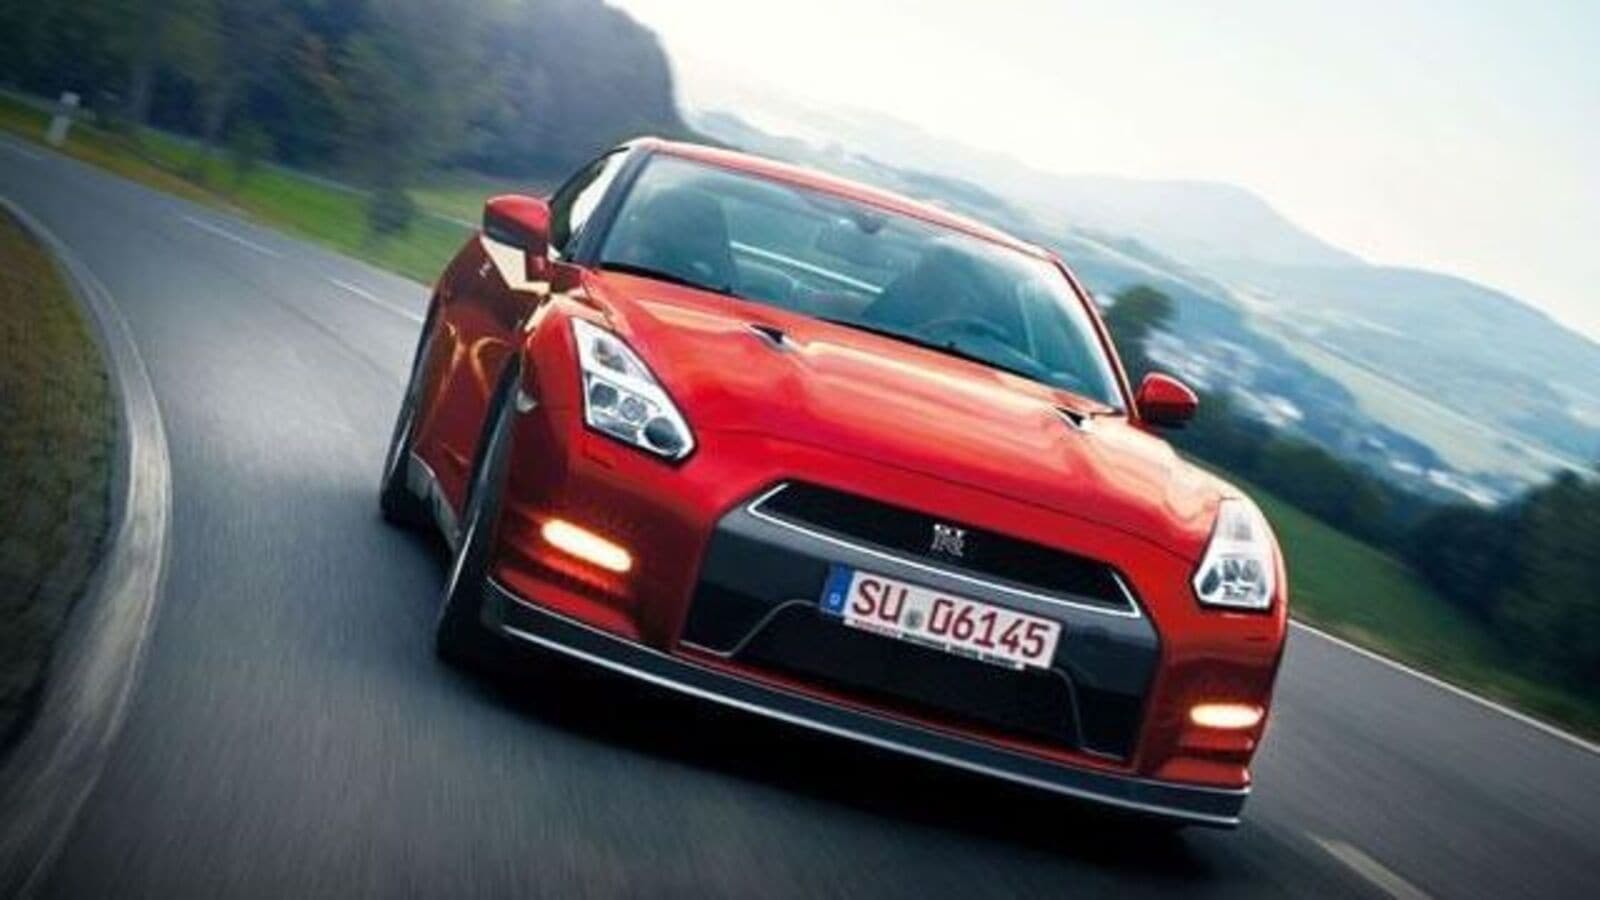 Nissan hints at an electric GT-R, likely to come in the distant future